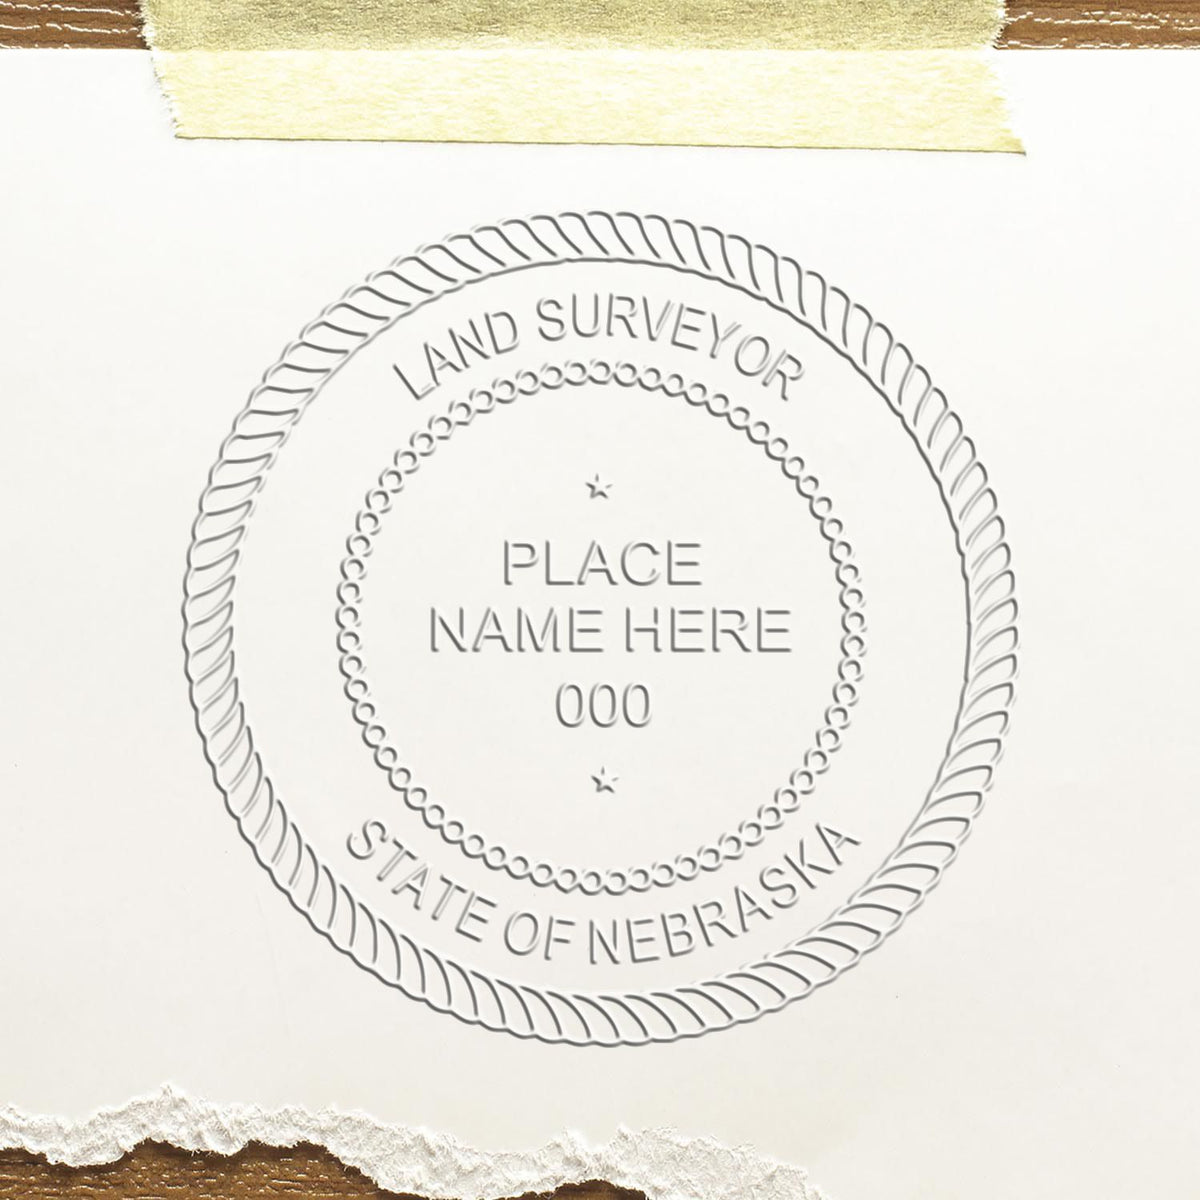 A lifestyle photo showing a stamped image of the Nebraska Desk Surveyor Seal Embosser on a piece of paper